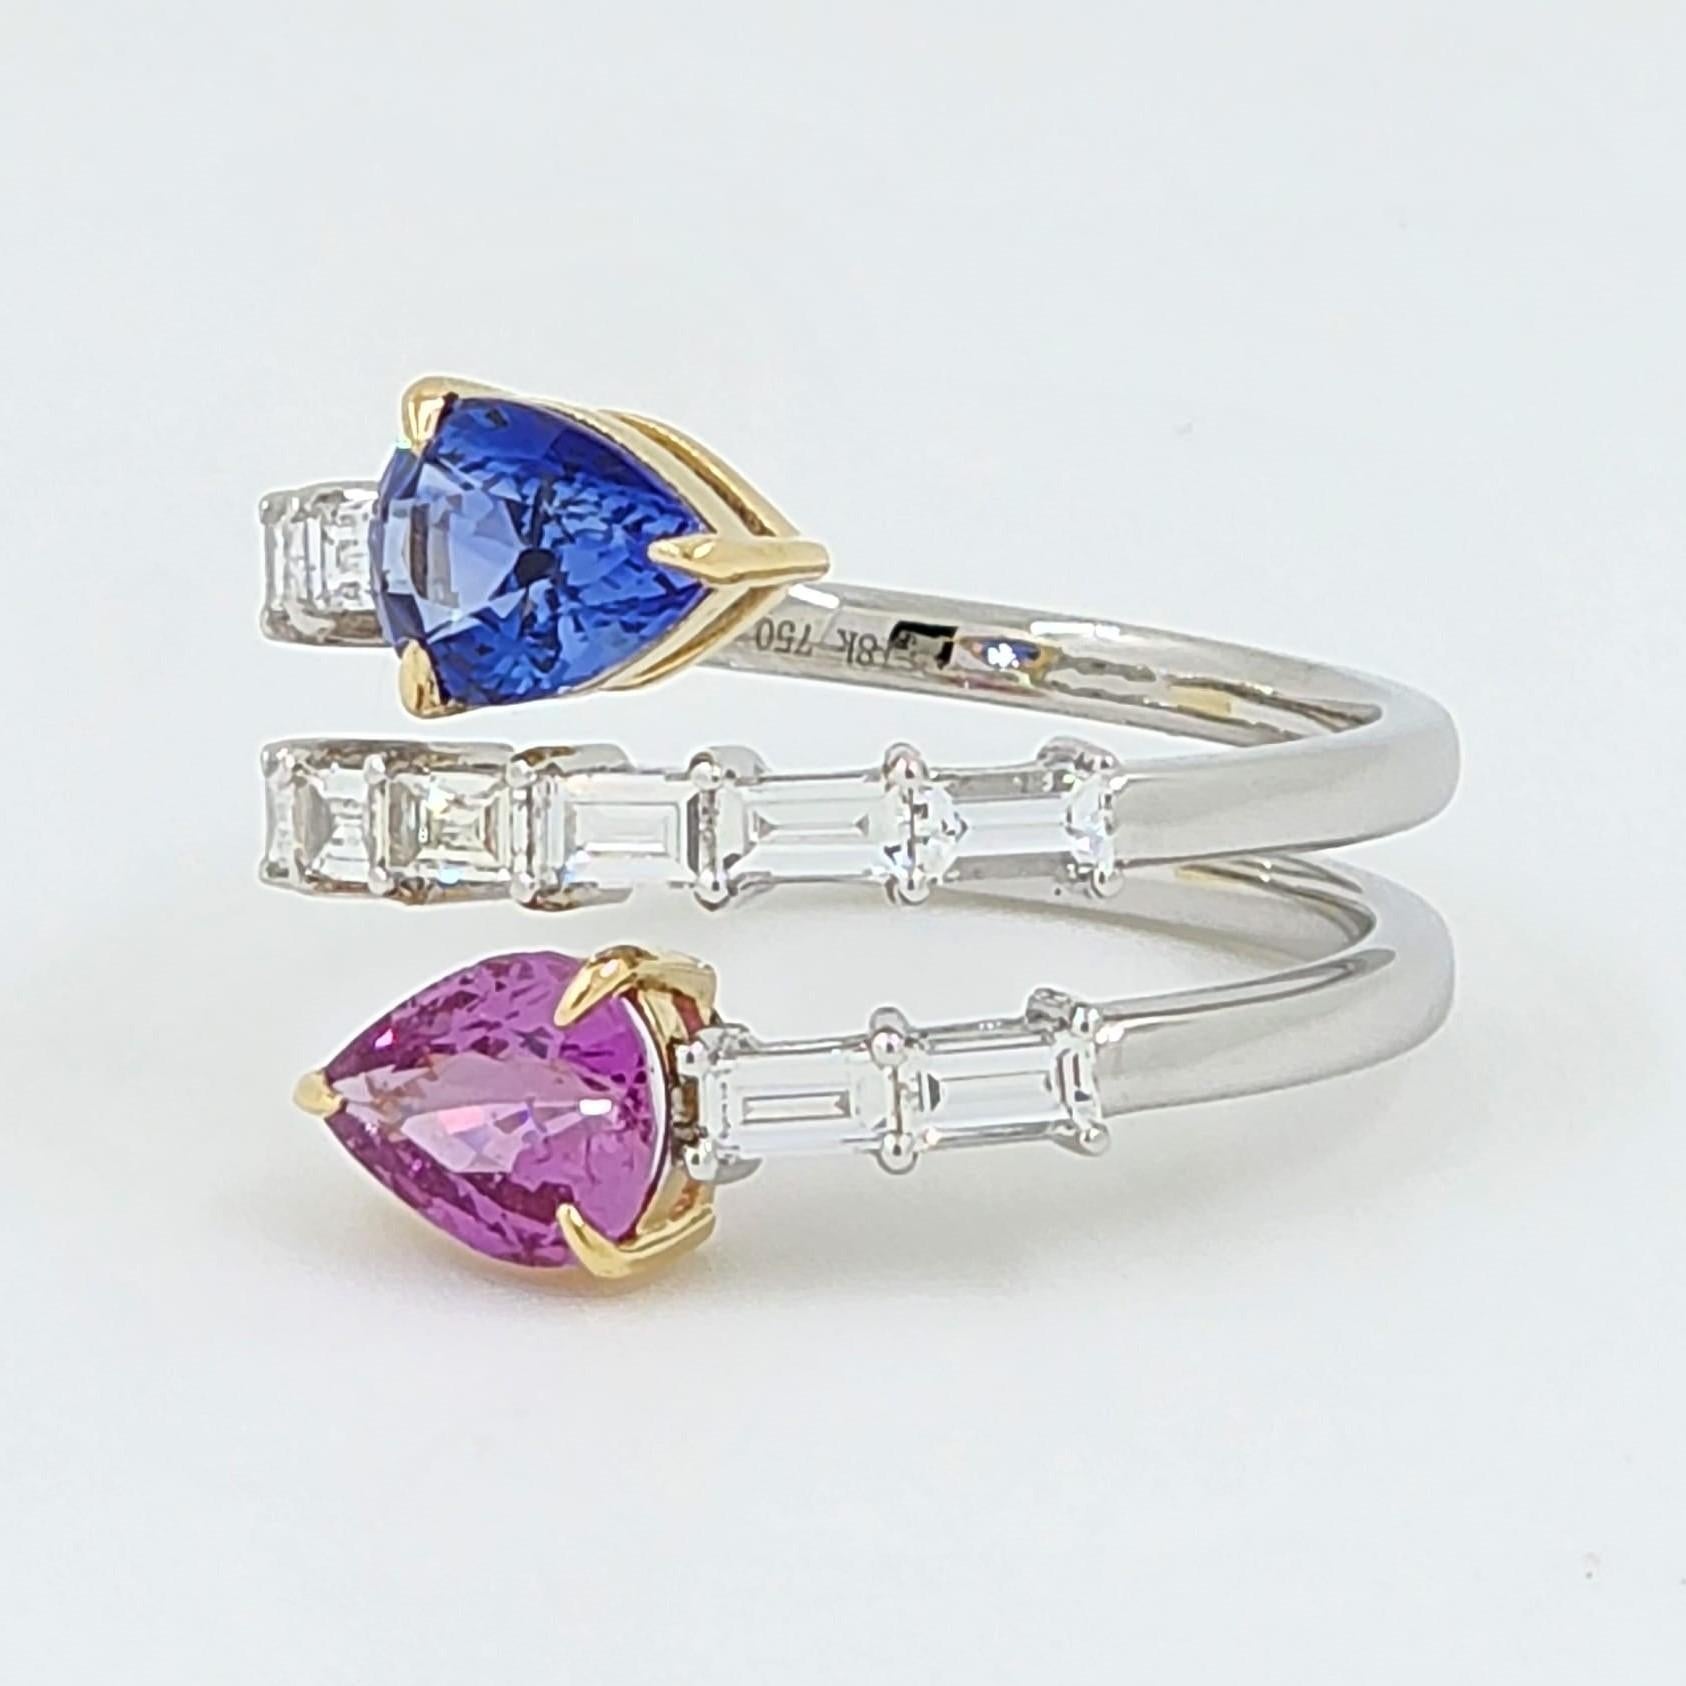 Contemporary Pear Shape Blue and Pink Sapphire Diamond Ring in 18 Karat Yellow and White Gold